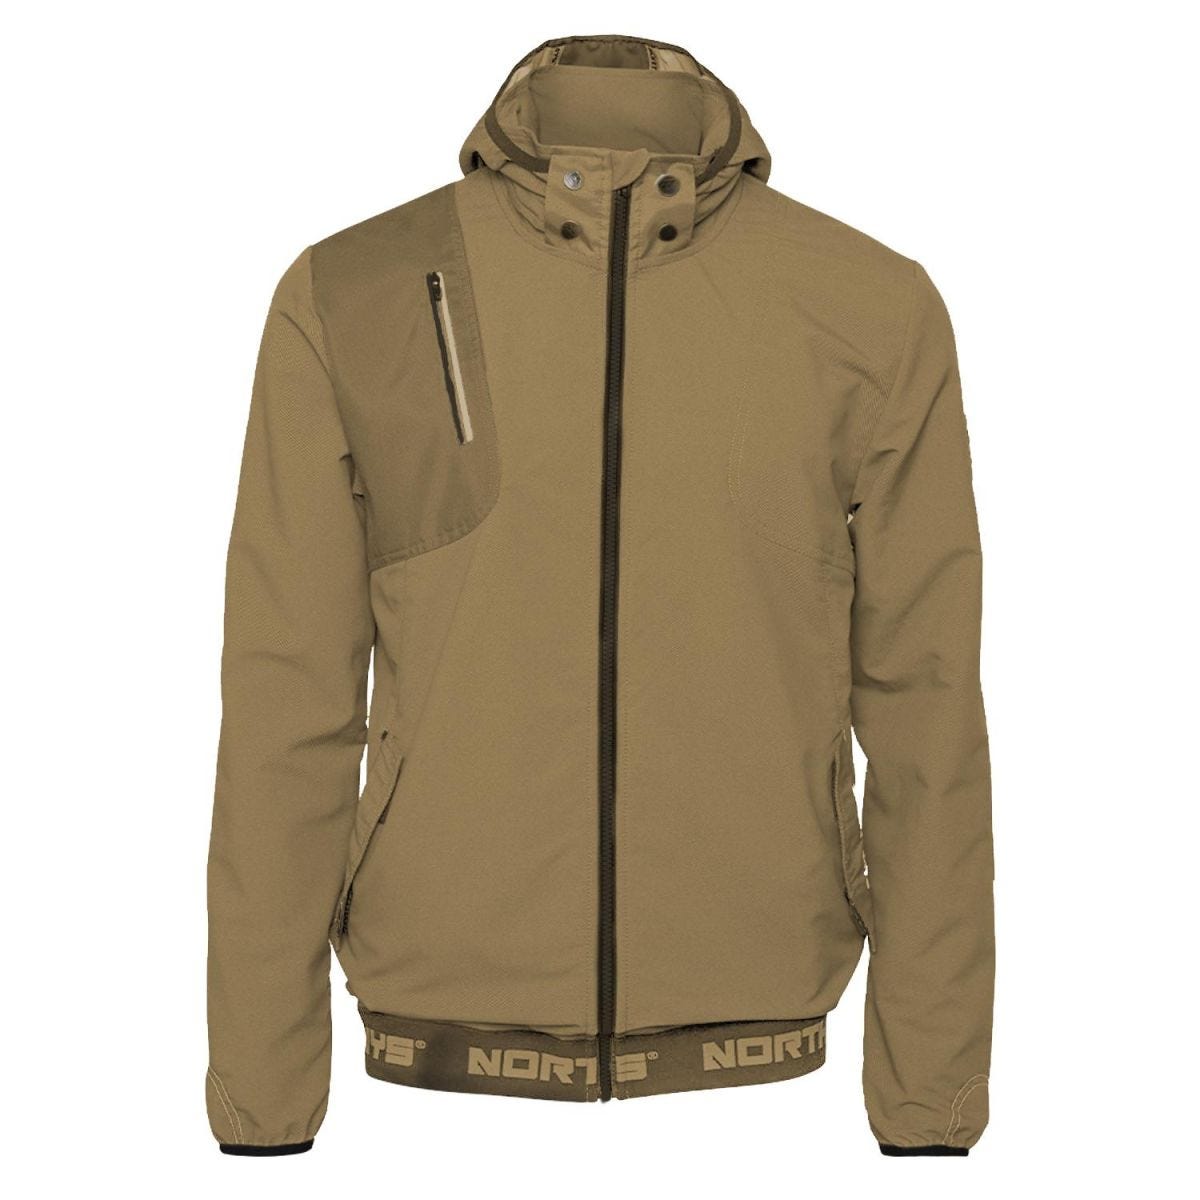 Blouson de travail multipoches Irons beige - North Ways - Taille L 1